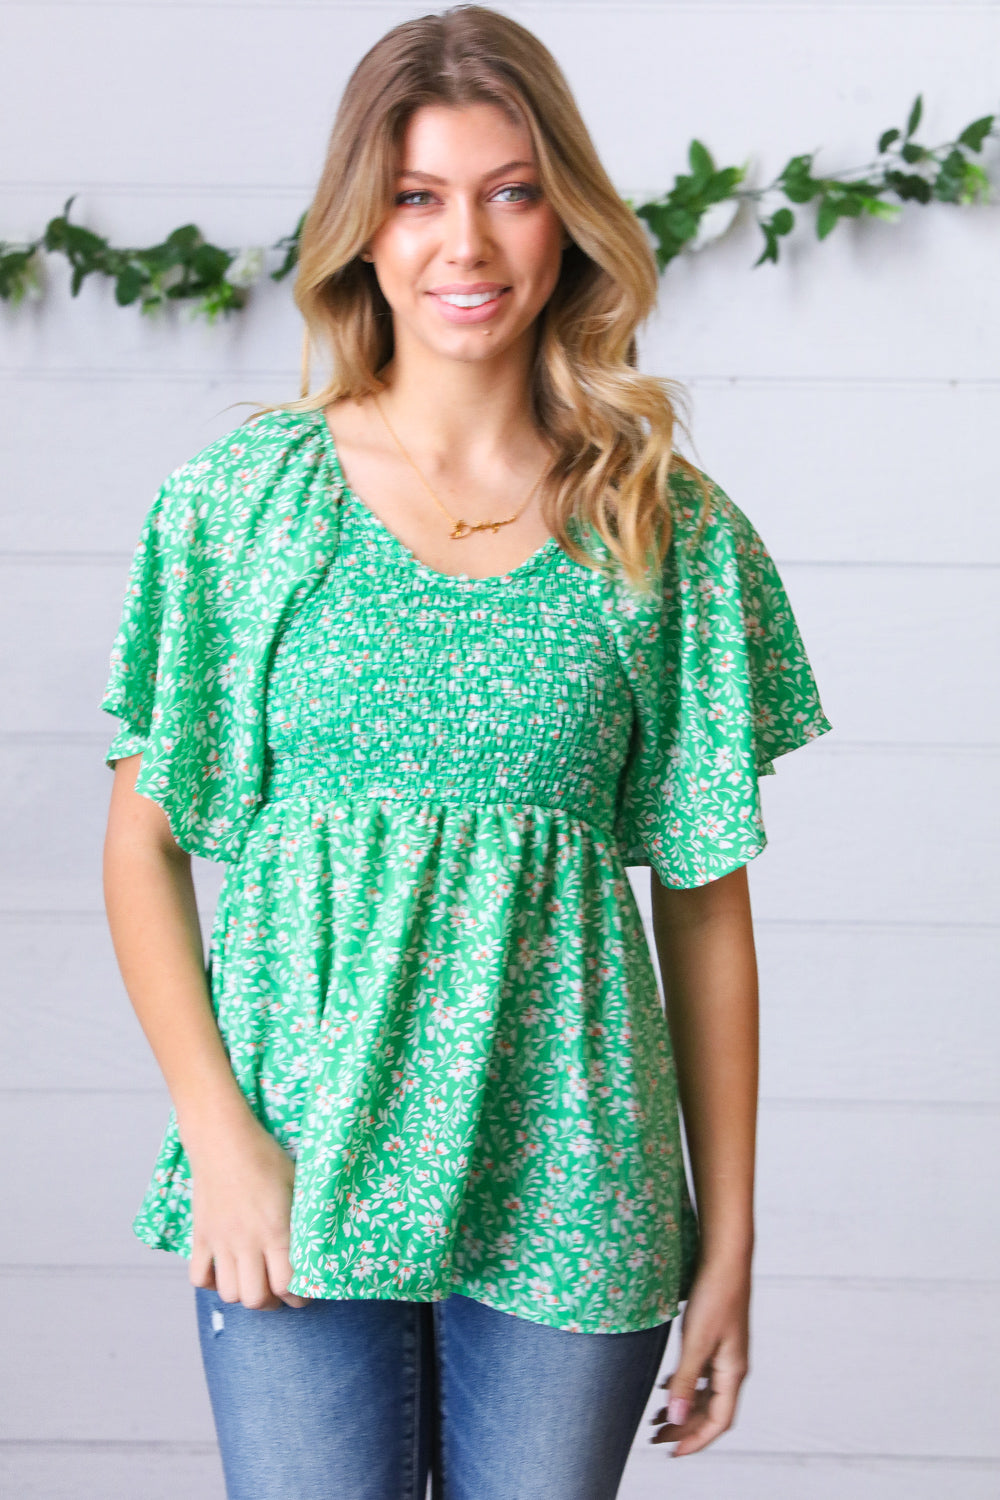 Garden Party Smocked Floral Blouse   